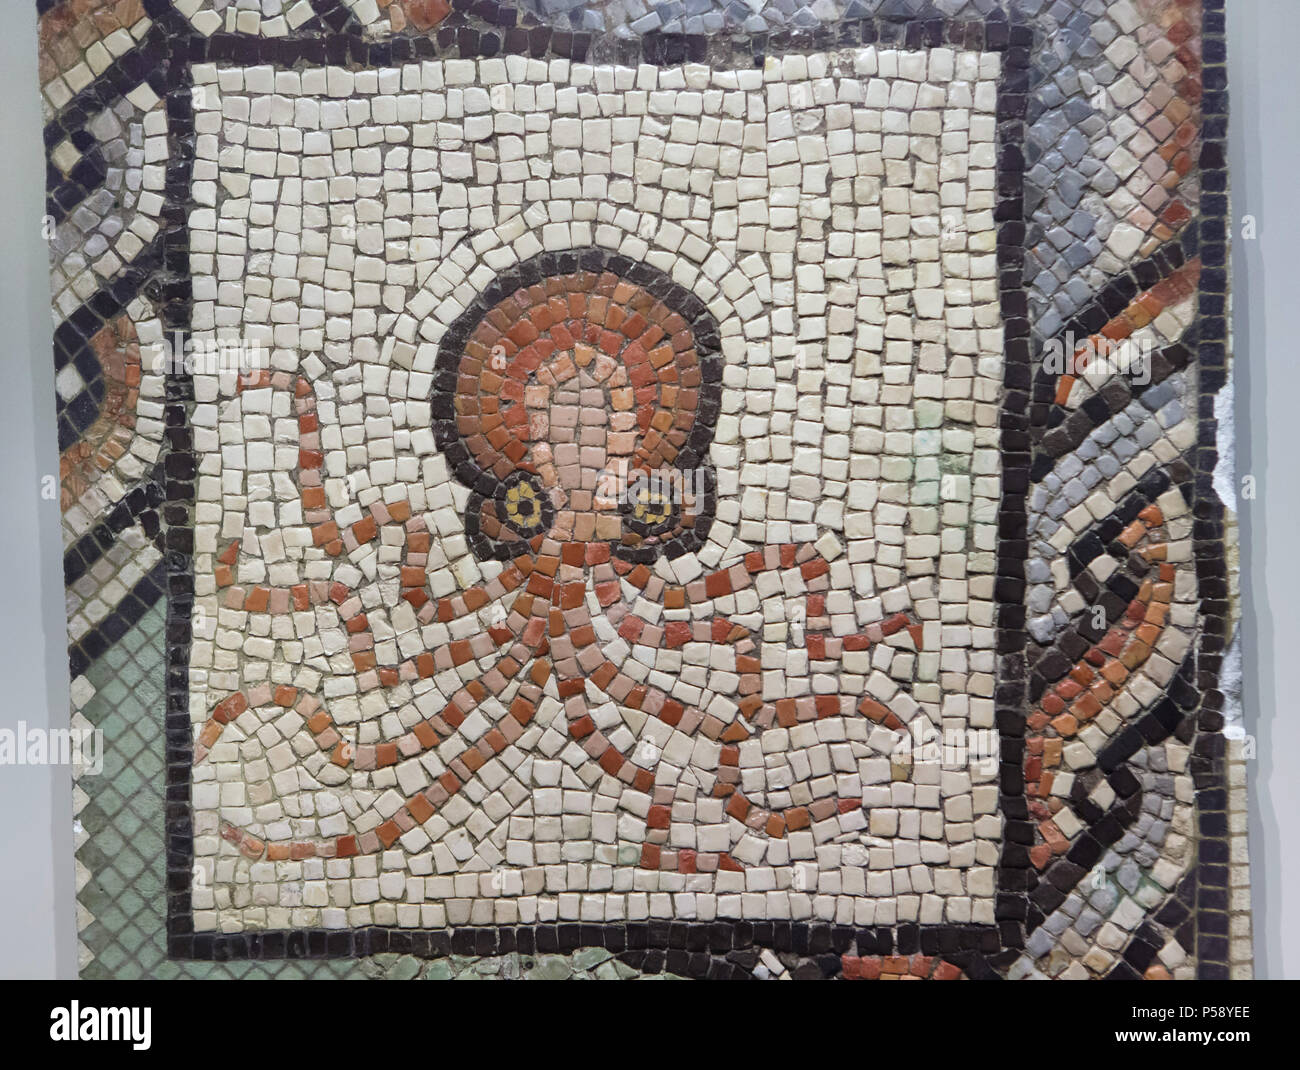 Octopus (Octopus vulgaris) depicted in the Roman mosaic dated from the 2nd or 3rd century AD from Villaquejida (León Province, Spain) on display in the National Archaeological Museum (Museo Arqueológico Nacional) in Madrid, Spain. Stock Photo